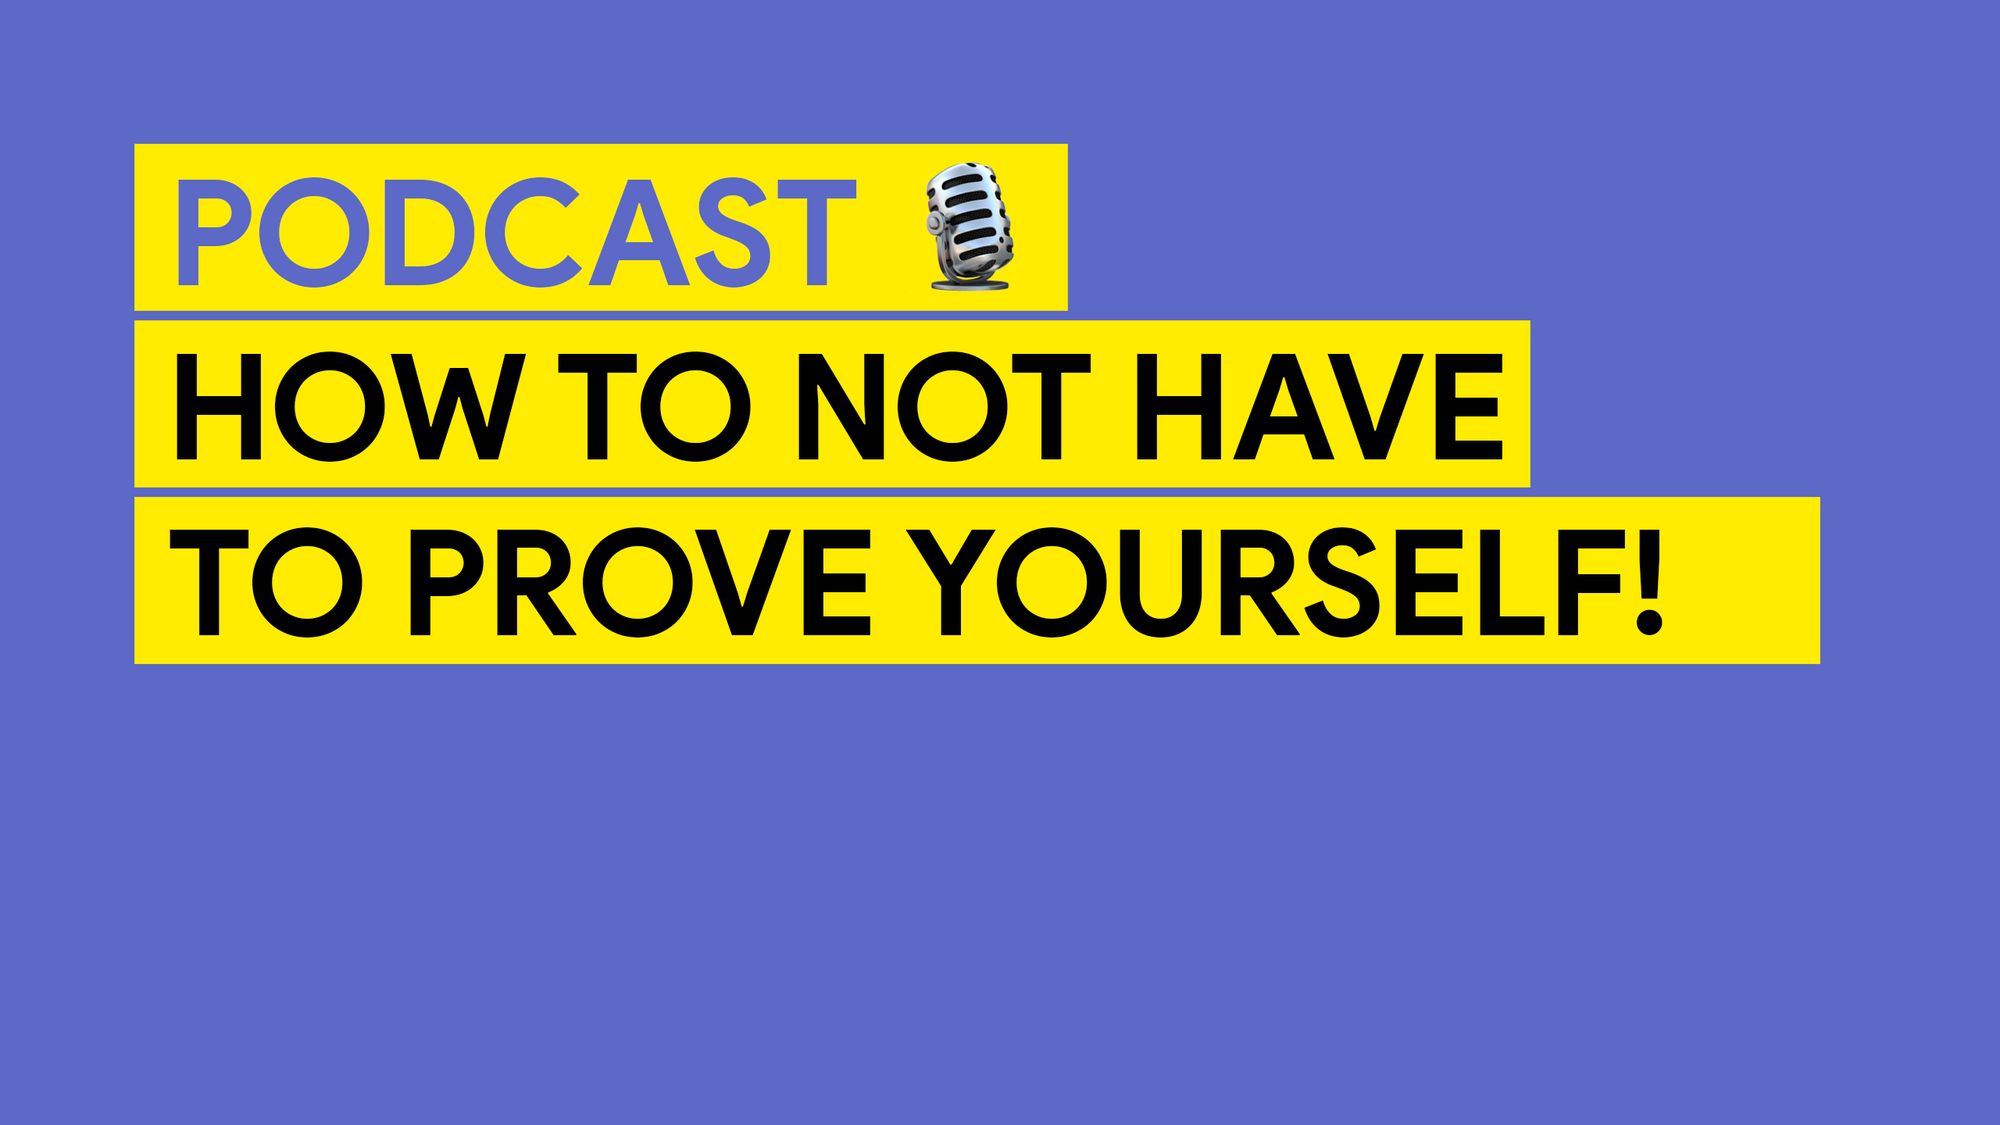 How to not have to prove yourself!